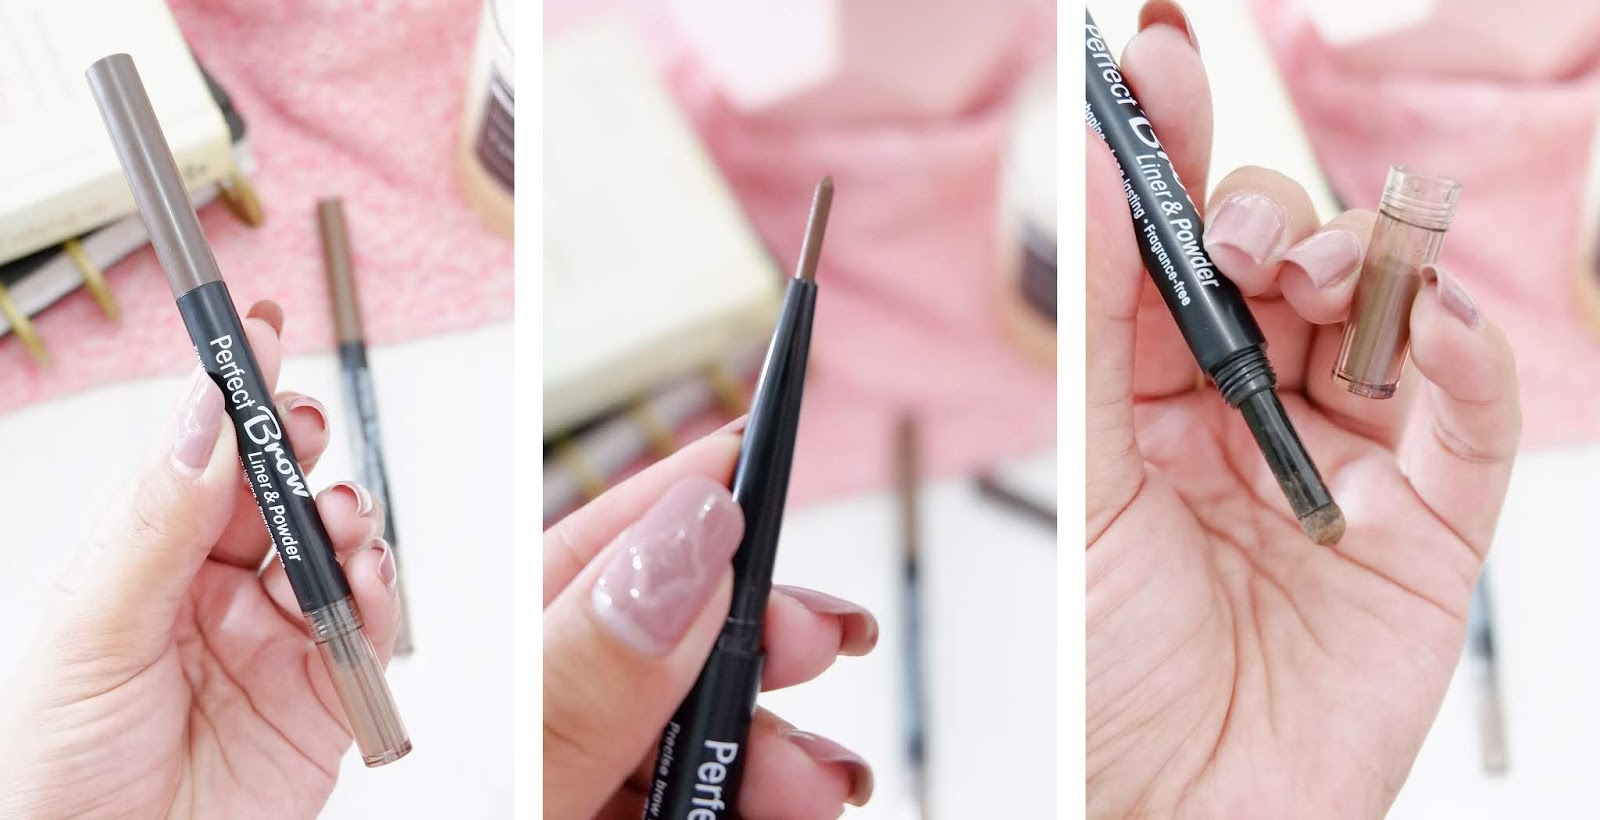 SILKYGIRL: PERFECT BROW LINER & POWDER REVIEW